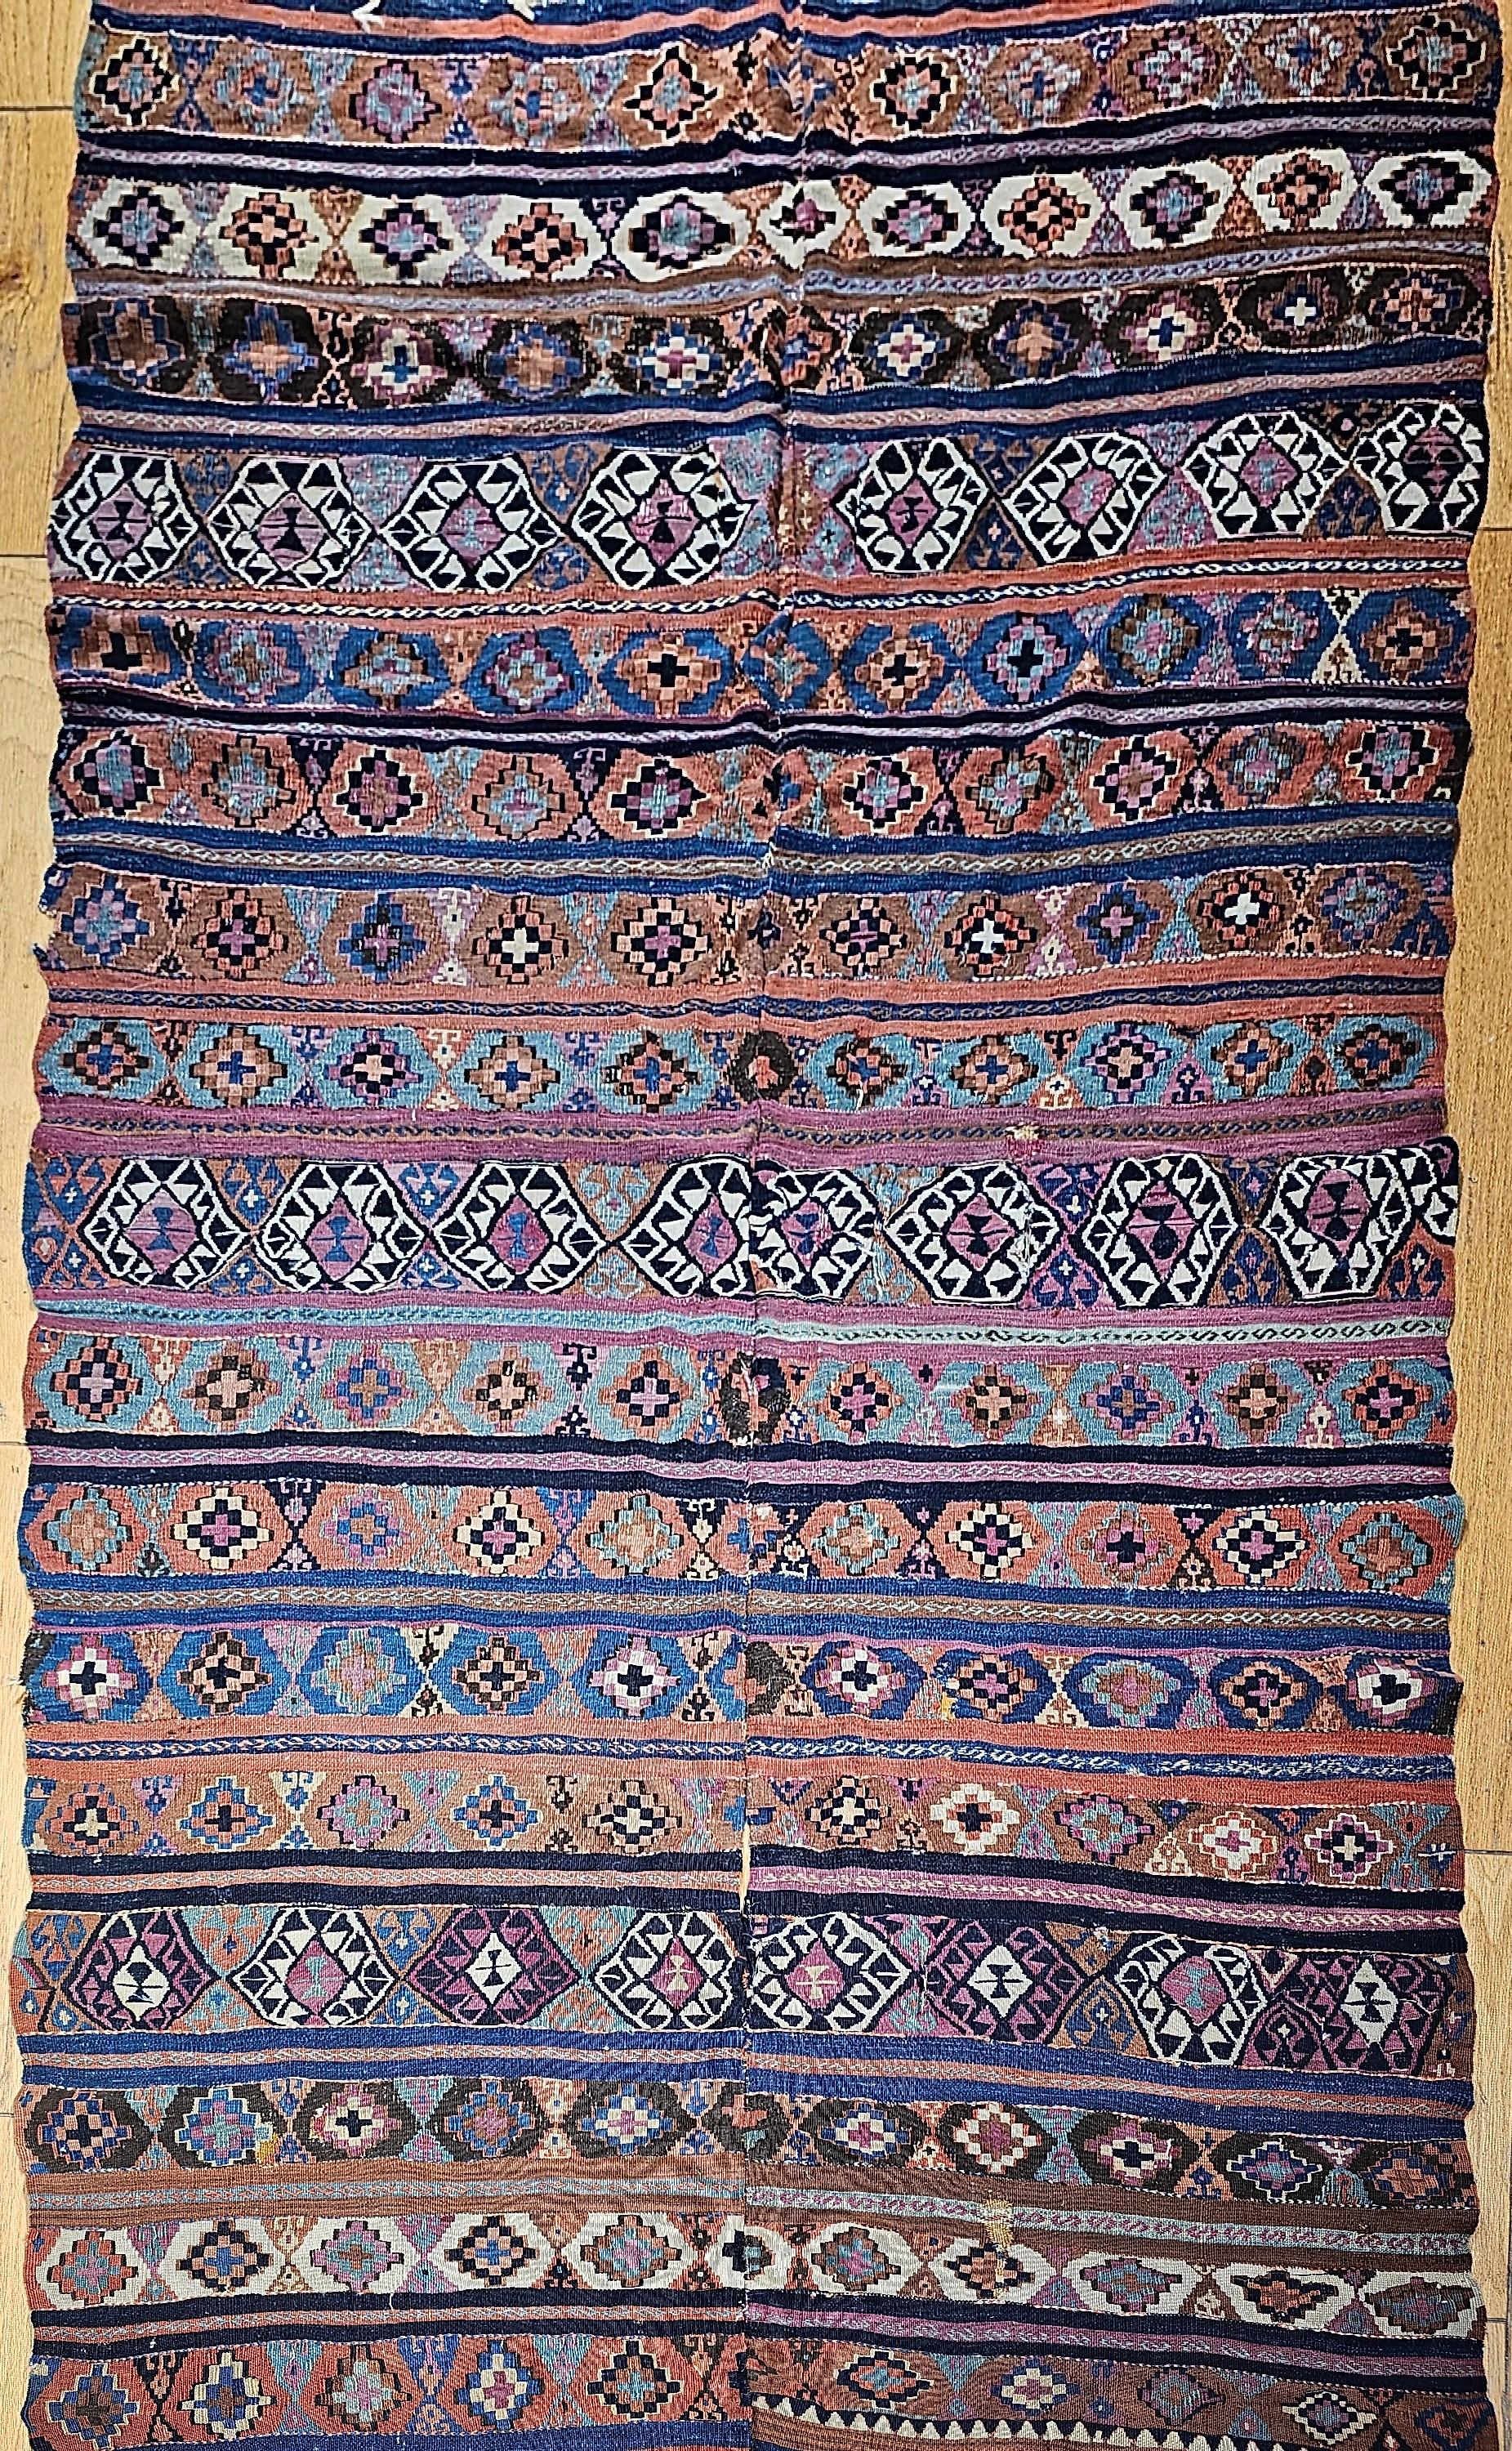  19th Century Caucasian Shirvan kilim in turquoise, purple, blue, ivory. Since Kilims are tapestry type flatweaves (no pile), finding one that is over 125 years in such a great condition is extremely rare. The village weavers usually made these in